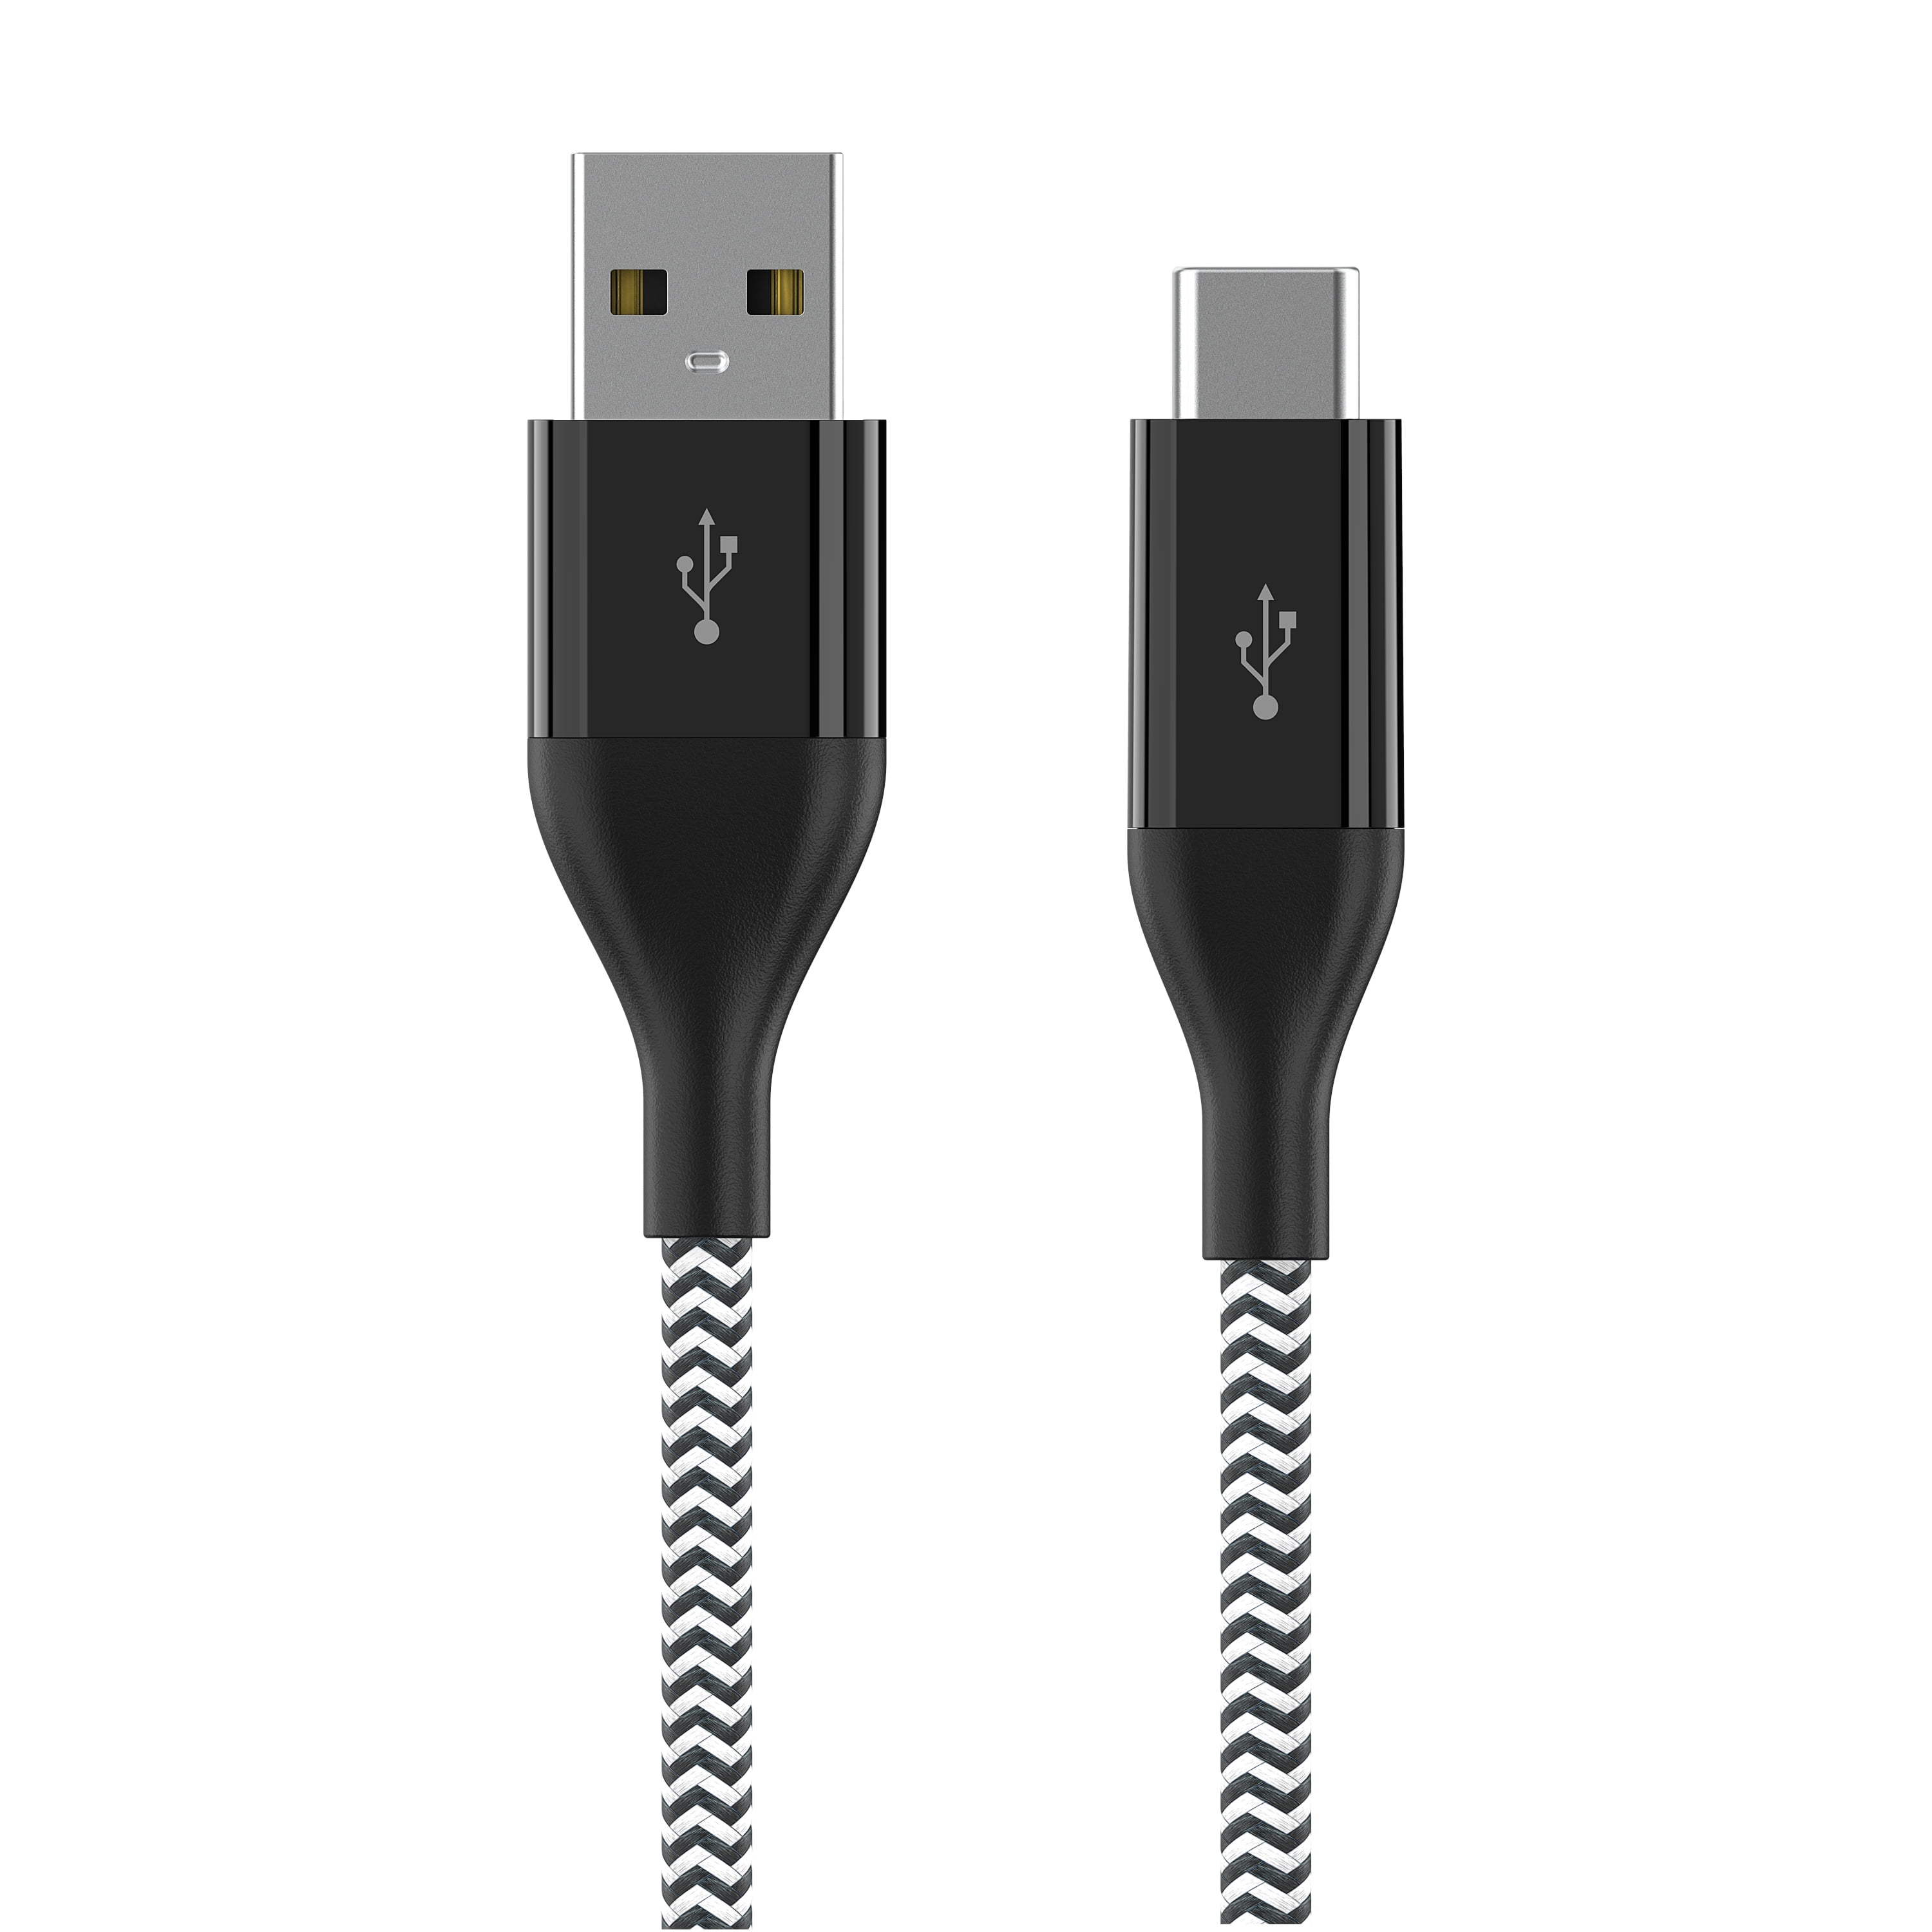 Auto Drive USB Type-A to Type-C  Data Sync and Charging Cable, 6 feet, Black, Compatible with a lot of devices